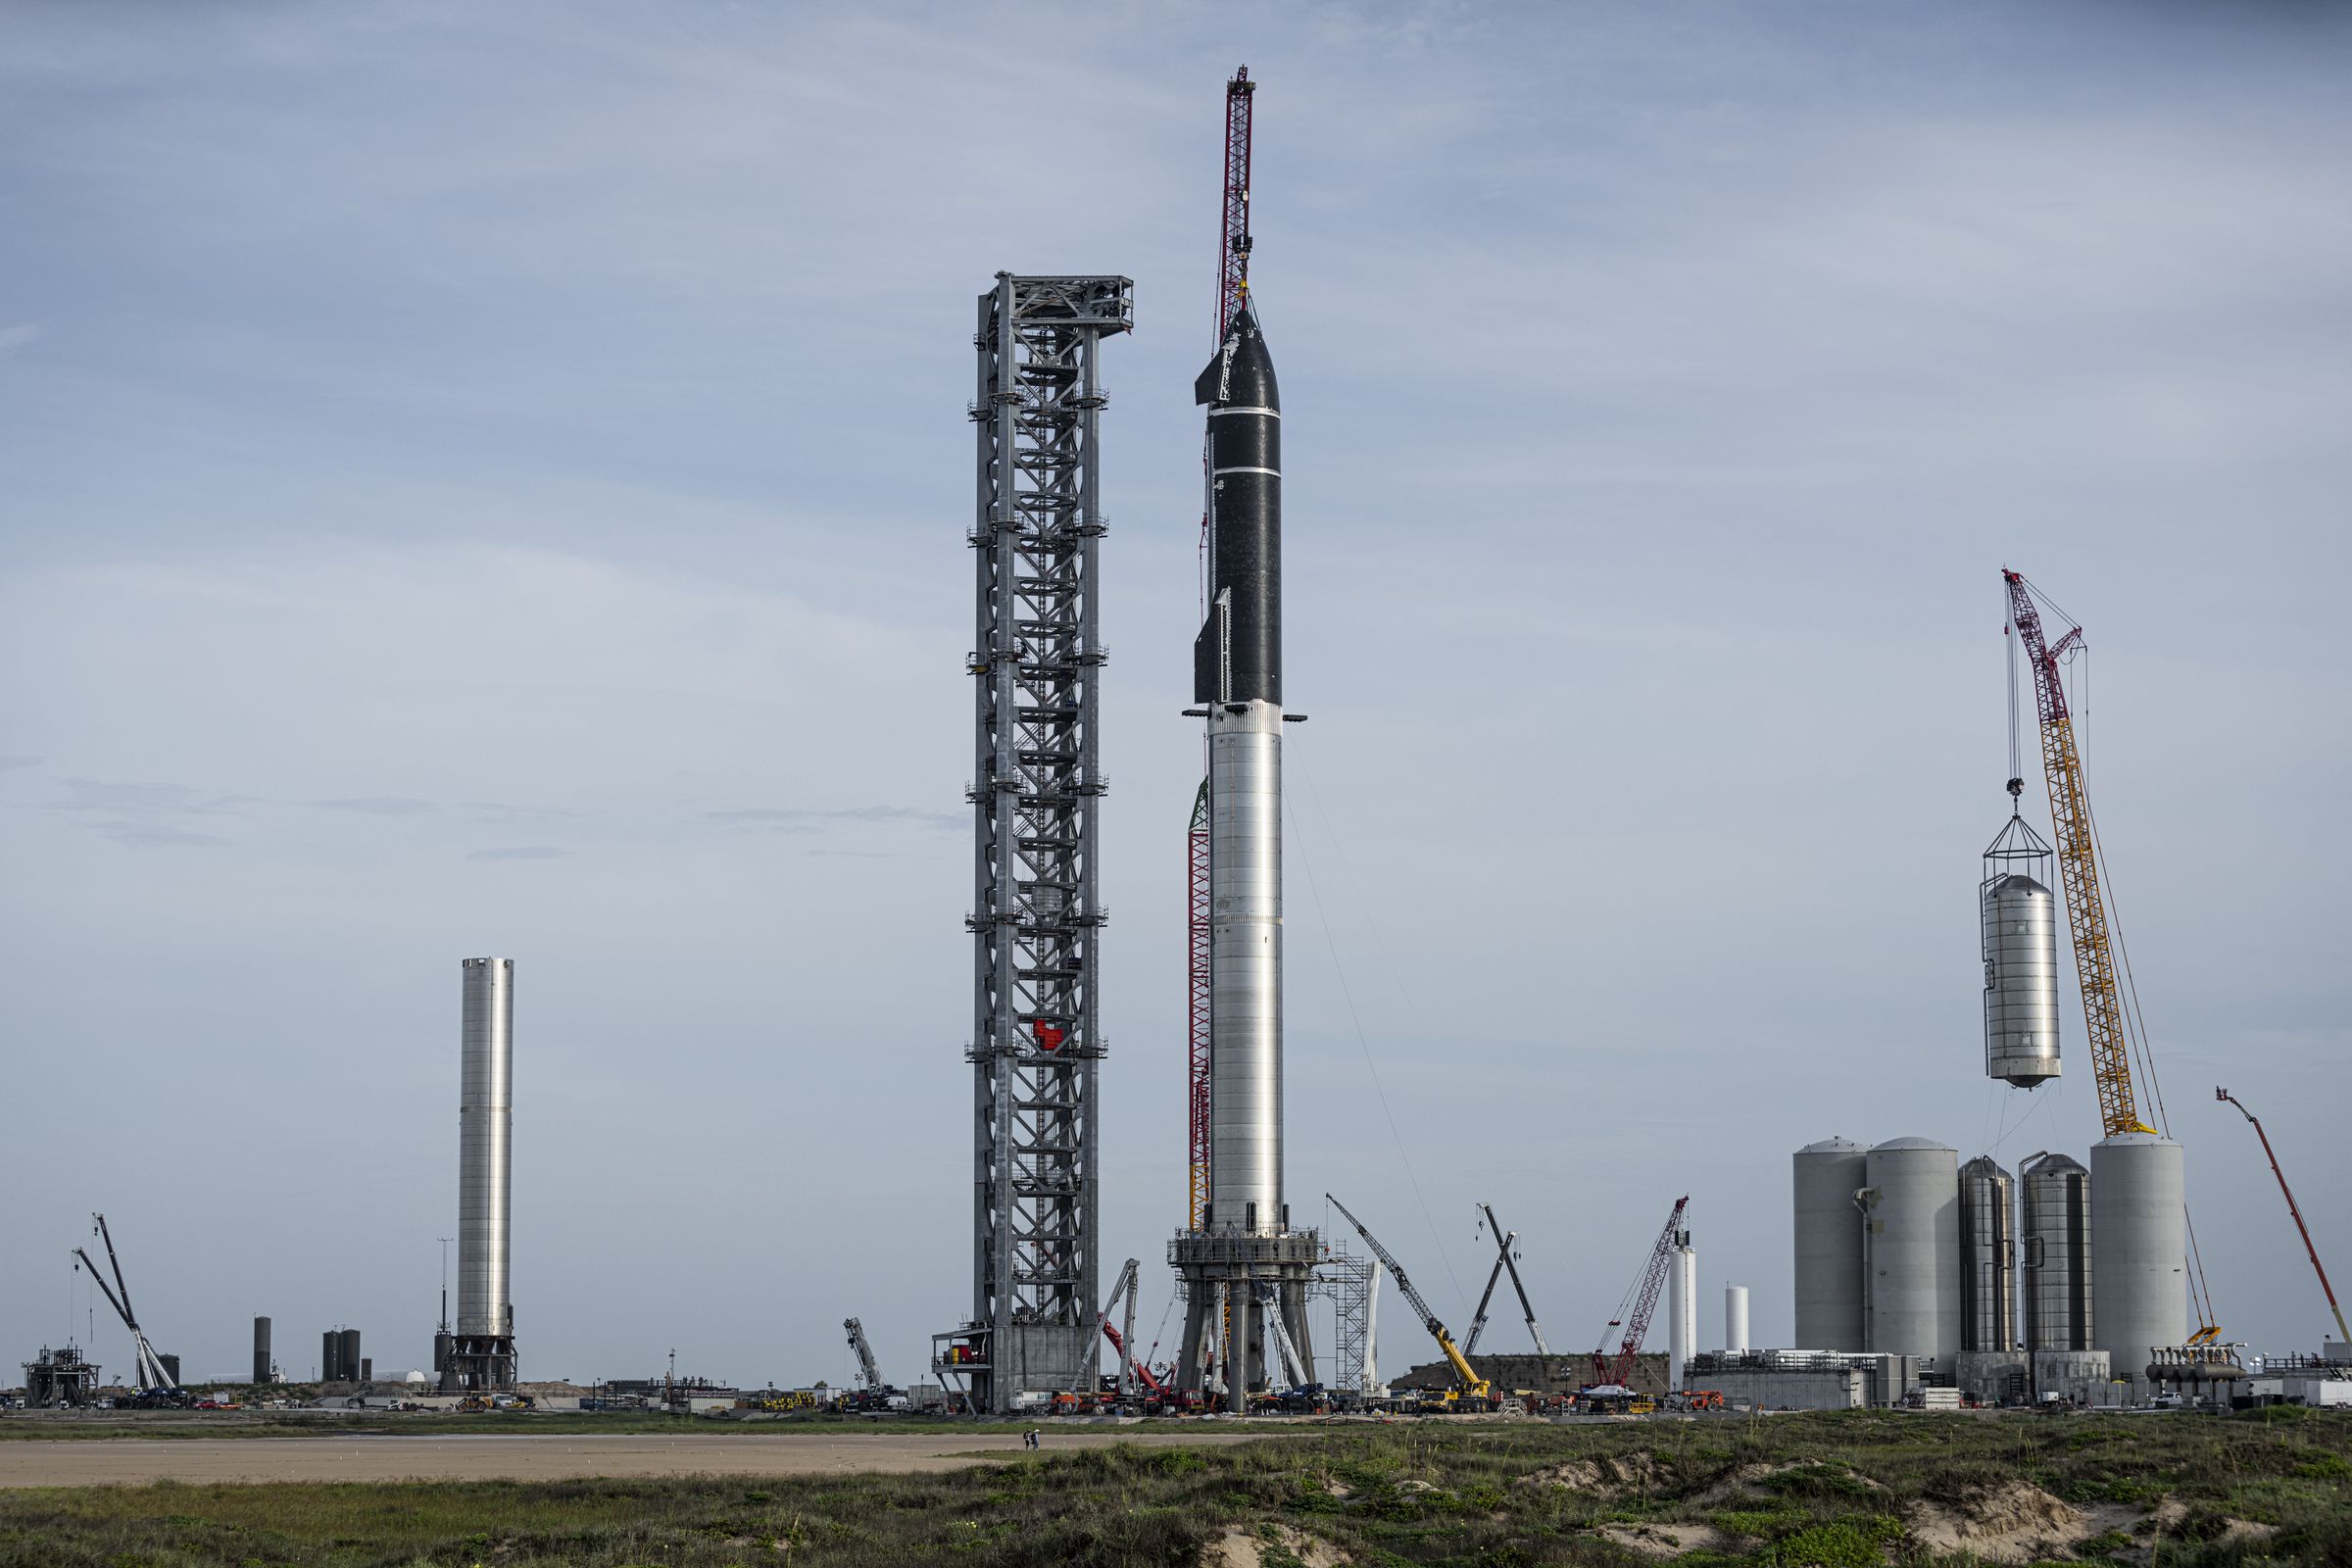 SpaceX stacking its Starship spacecraft on top of a Super Heavy booster at the company’s launch site in Boca Chica, Texas.